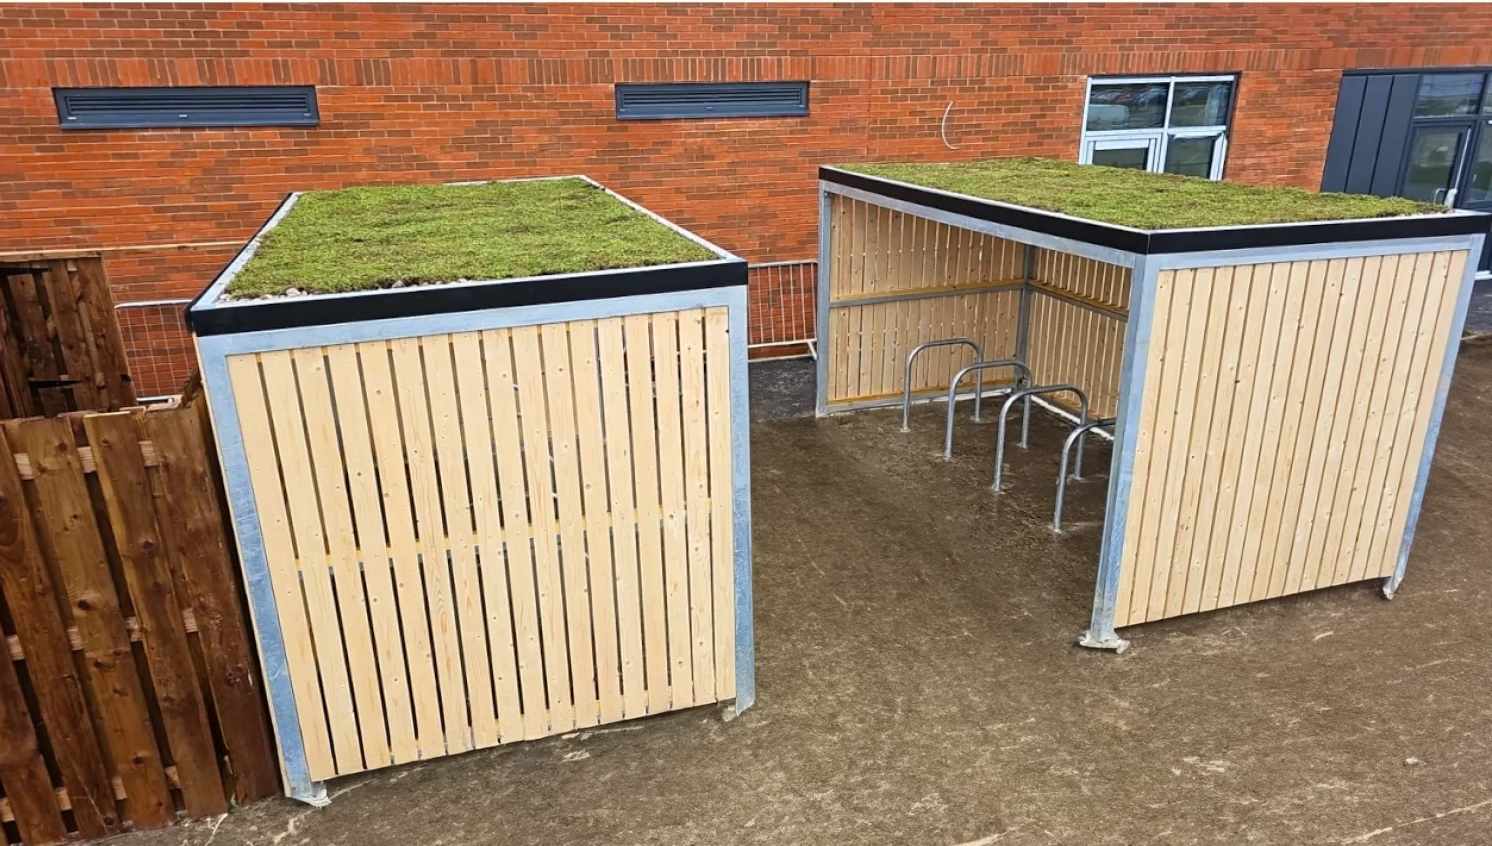 10 space Amazon eco cycle shelter with sedum roof and Sheffield galvanised cycle stand